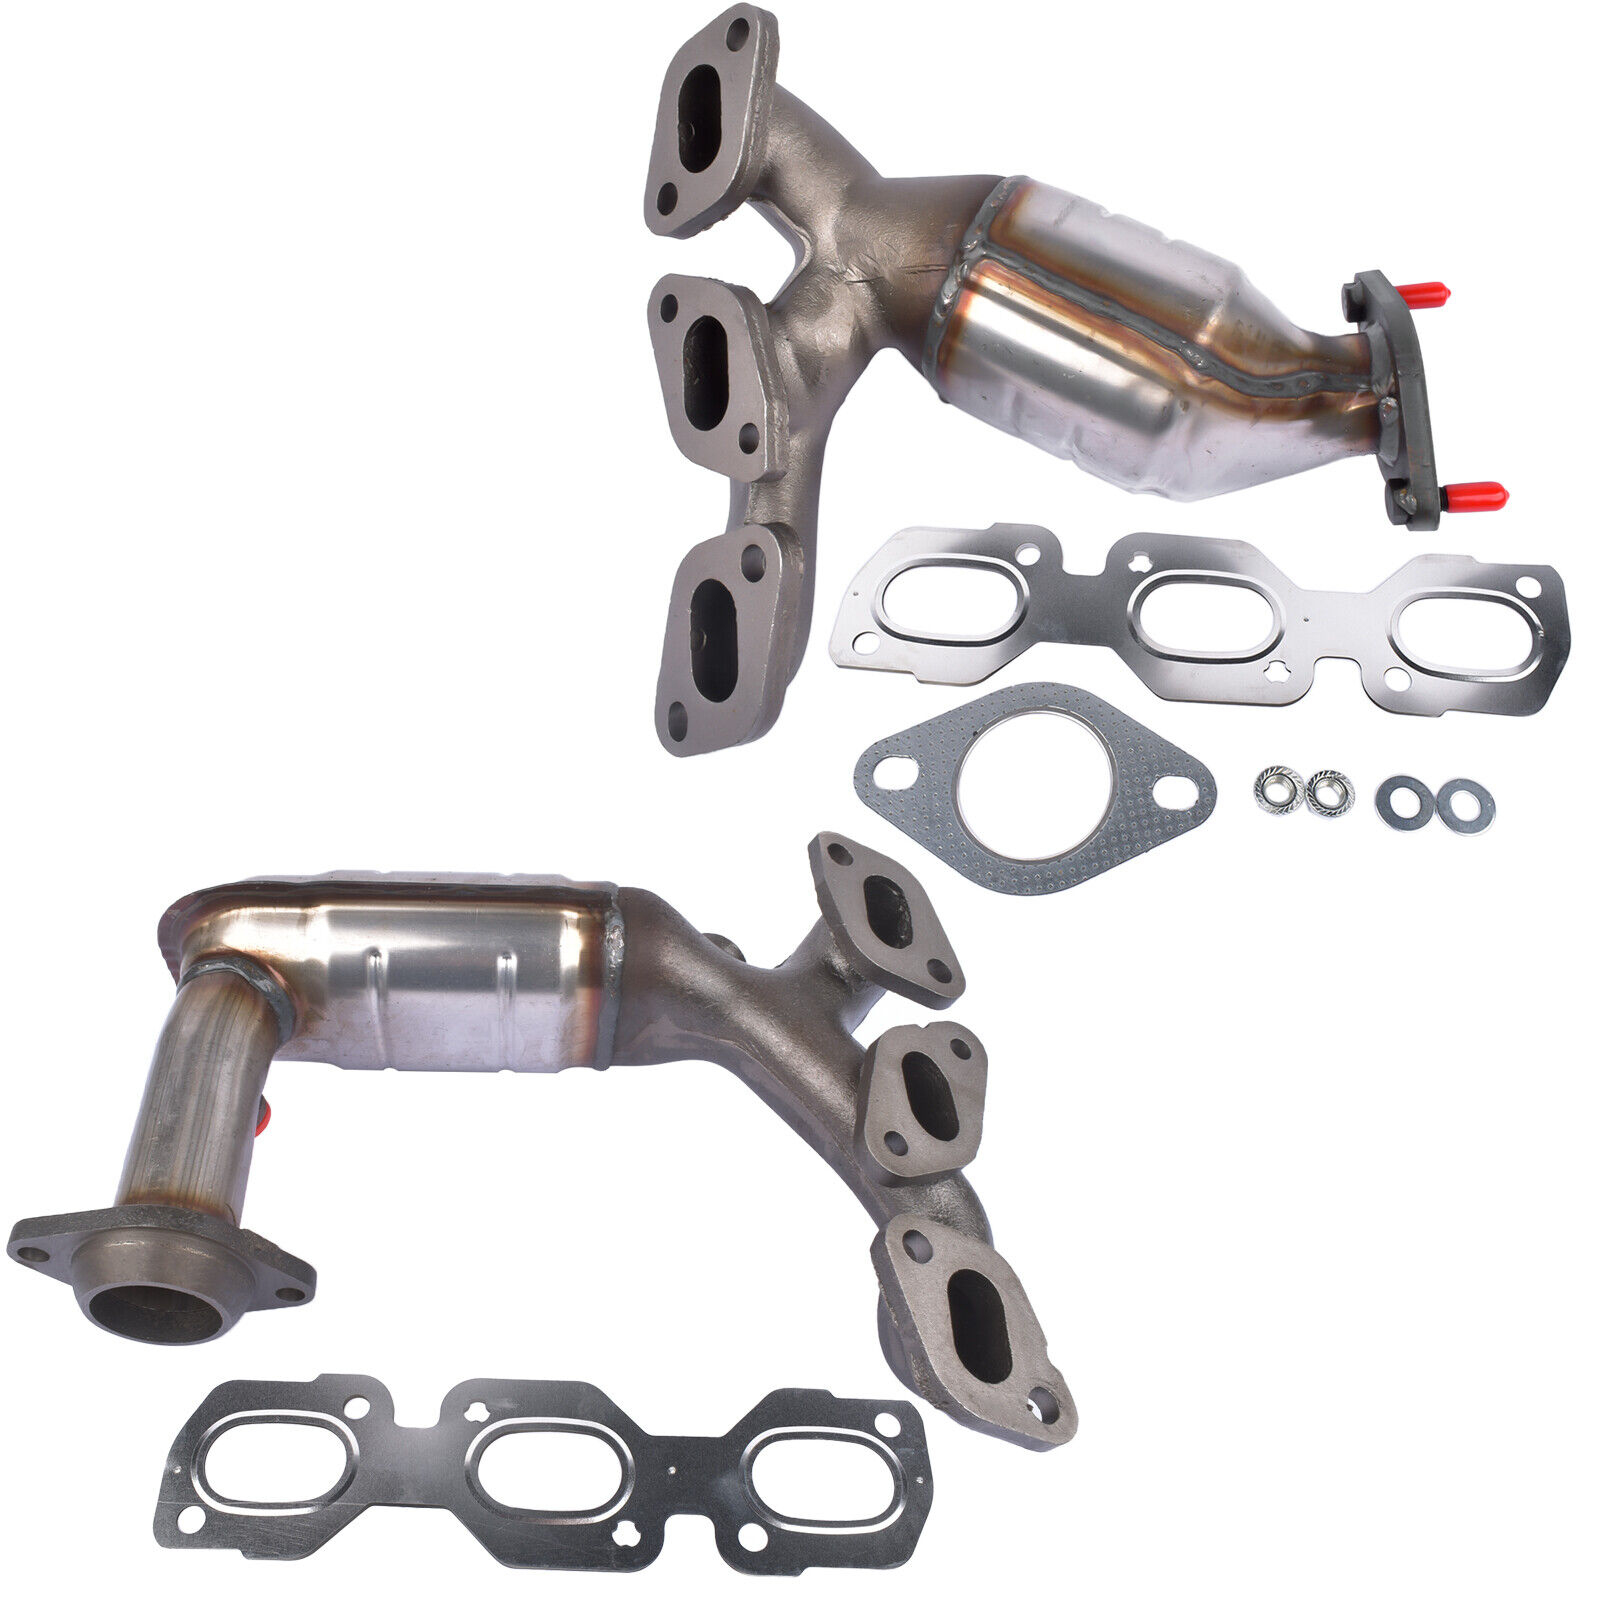 Exhaust Catalytic Converter Manifold for Mazda Mercury Ford Escape 3.0L 2001-07